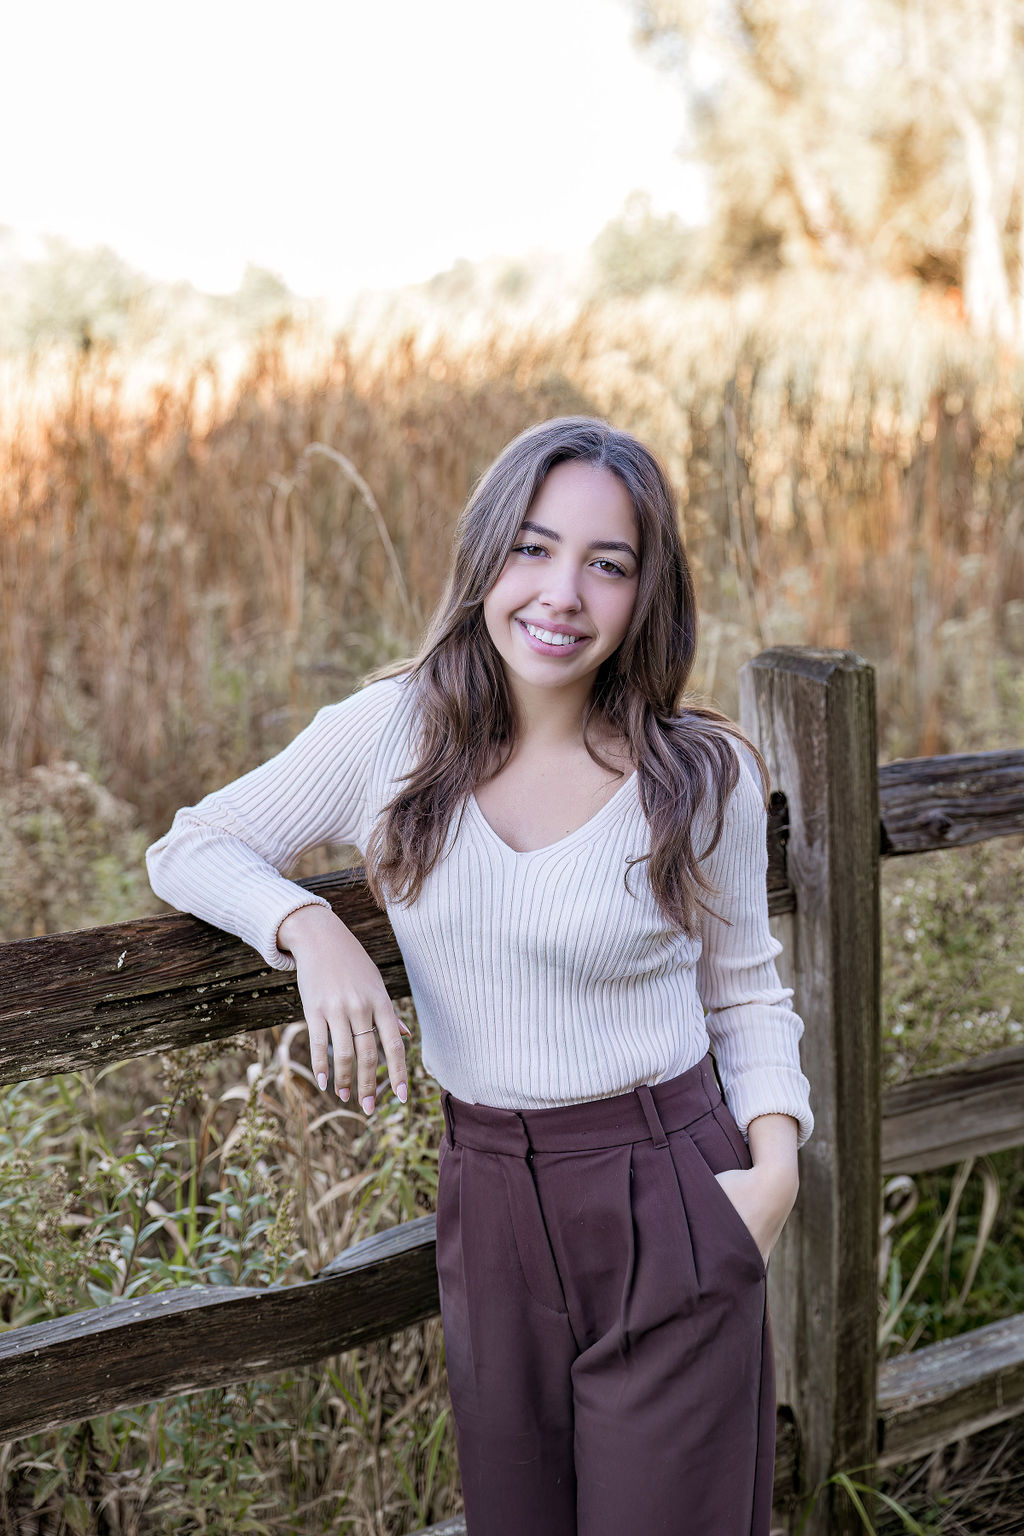 A teen girl in a white sweater leans against a wooden fence in a park